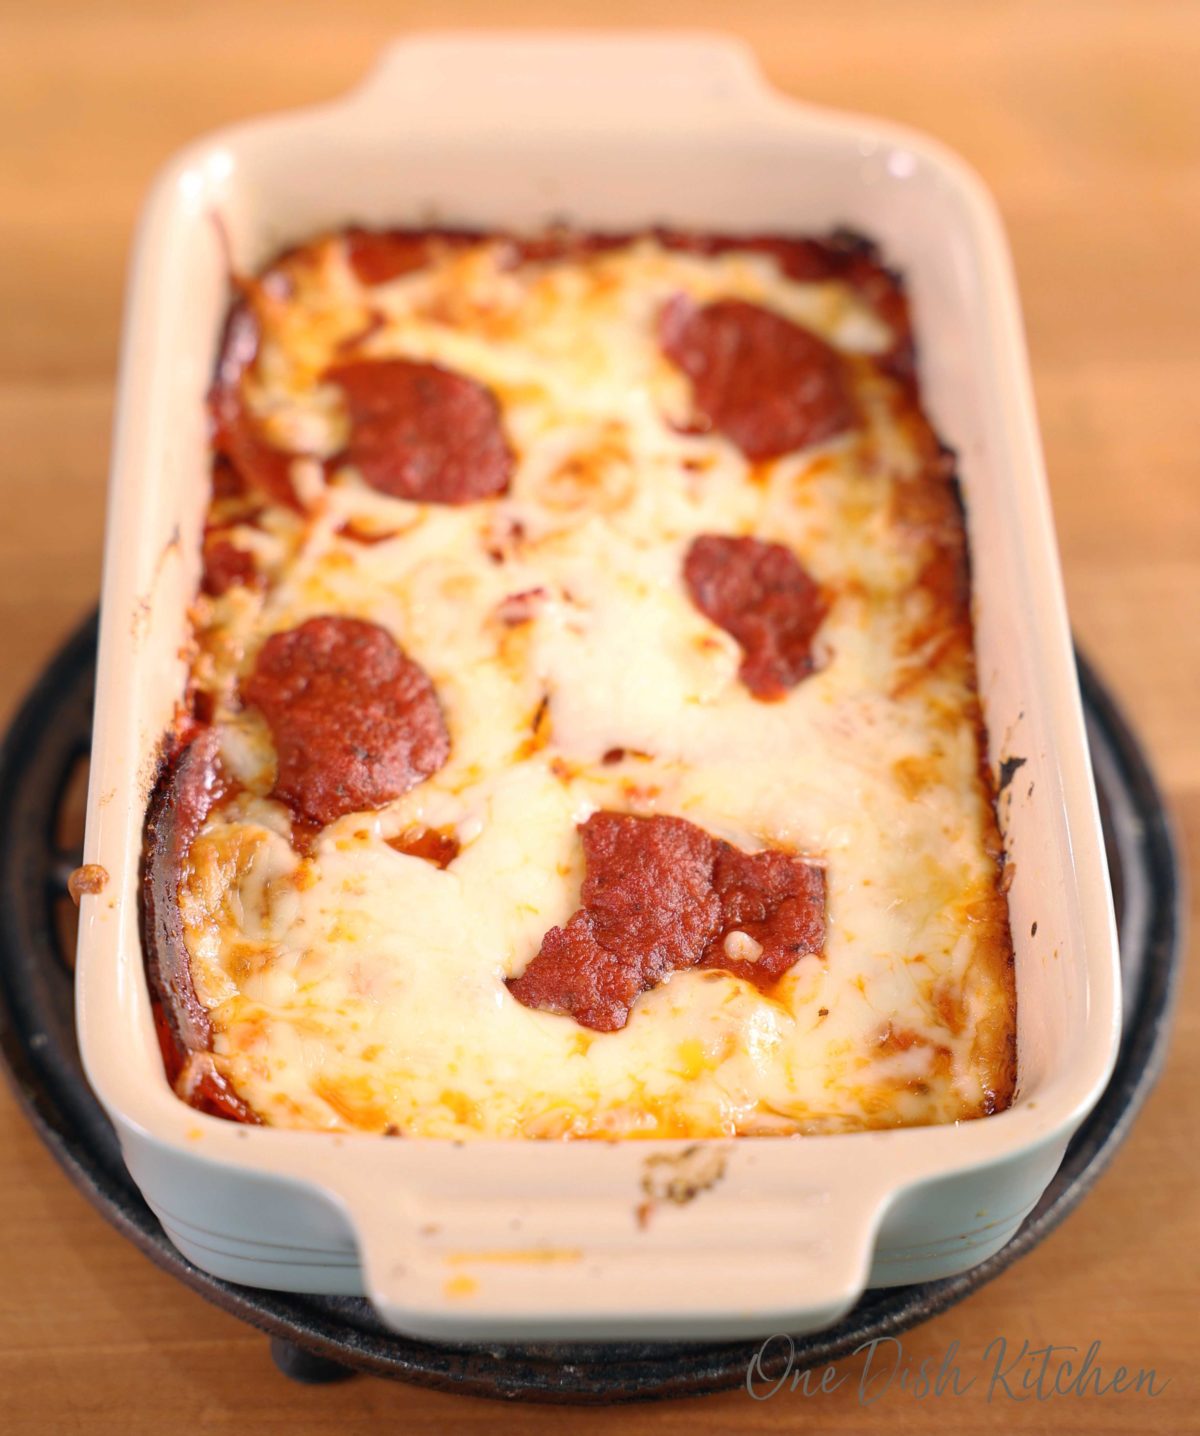 a small detroit style pizza in a blue rectangular baking dish.